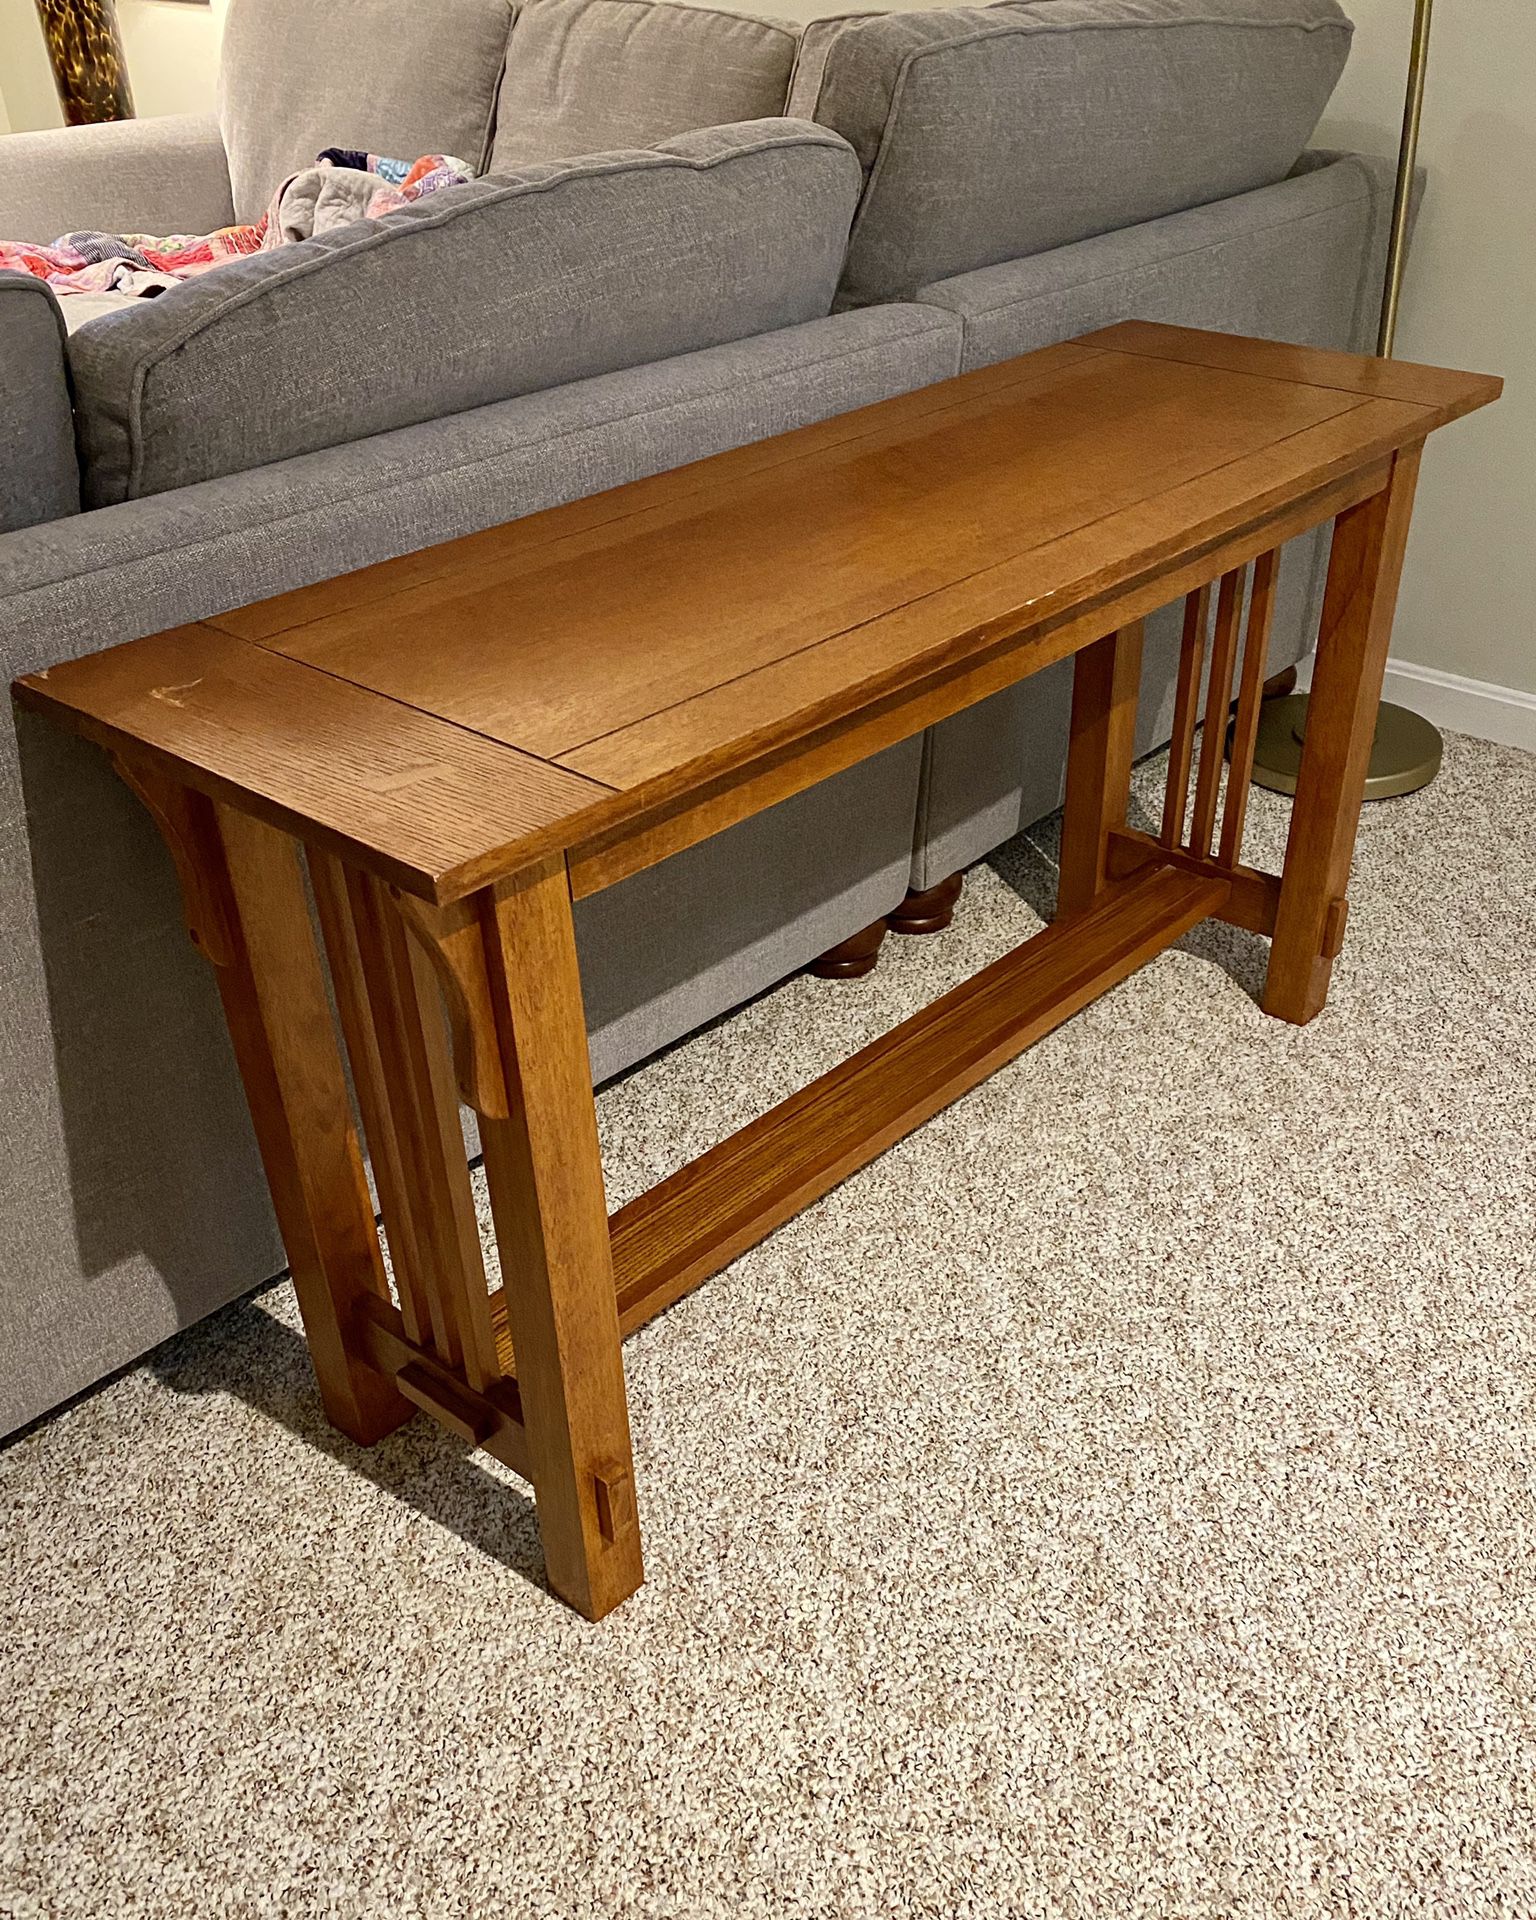 Sofa Console Table (solid wood)